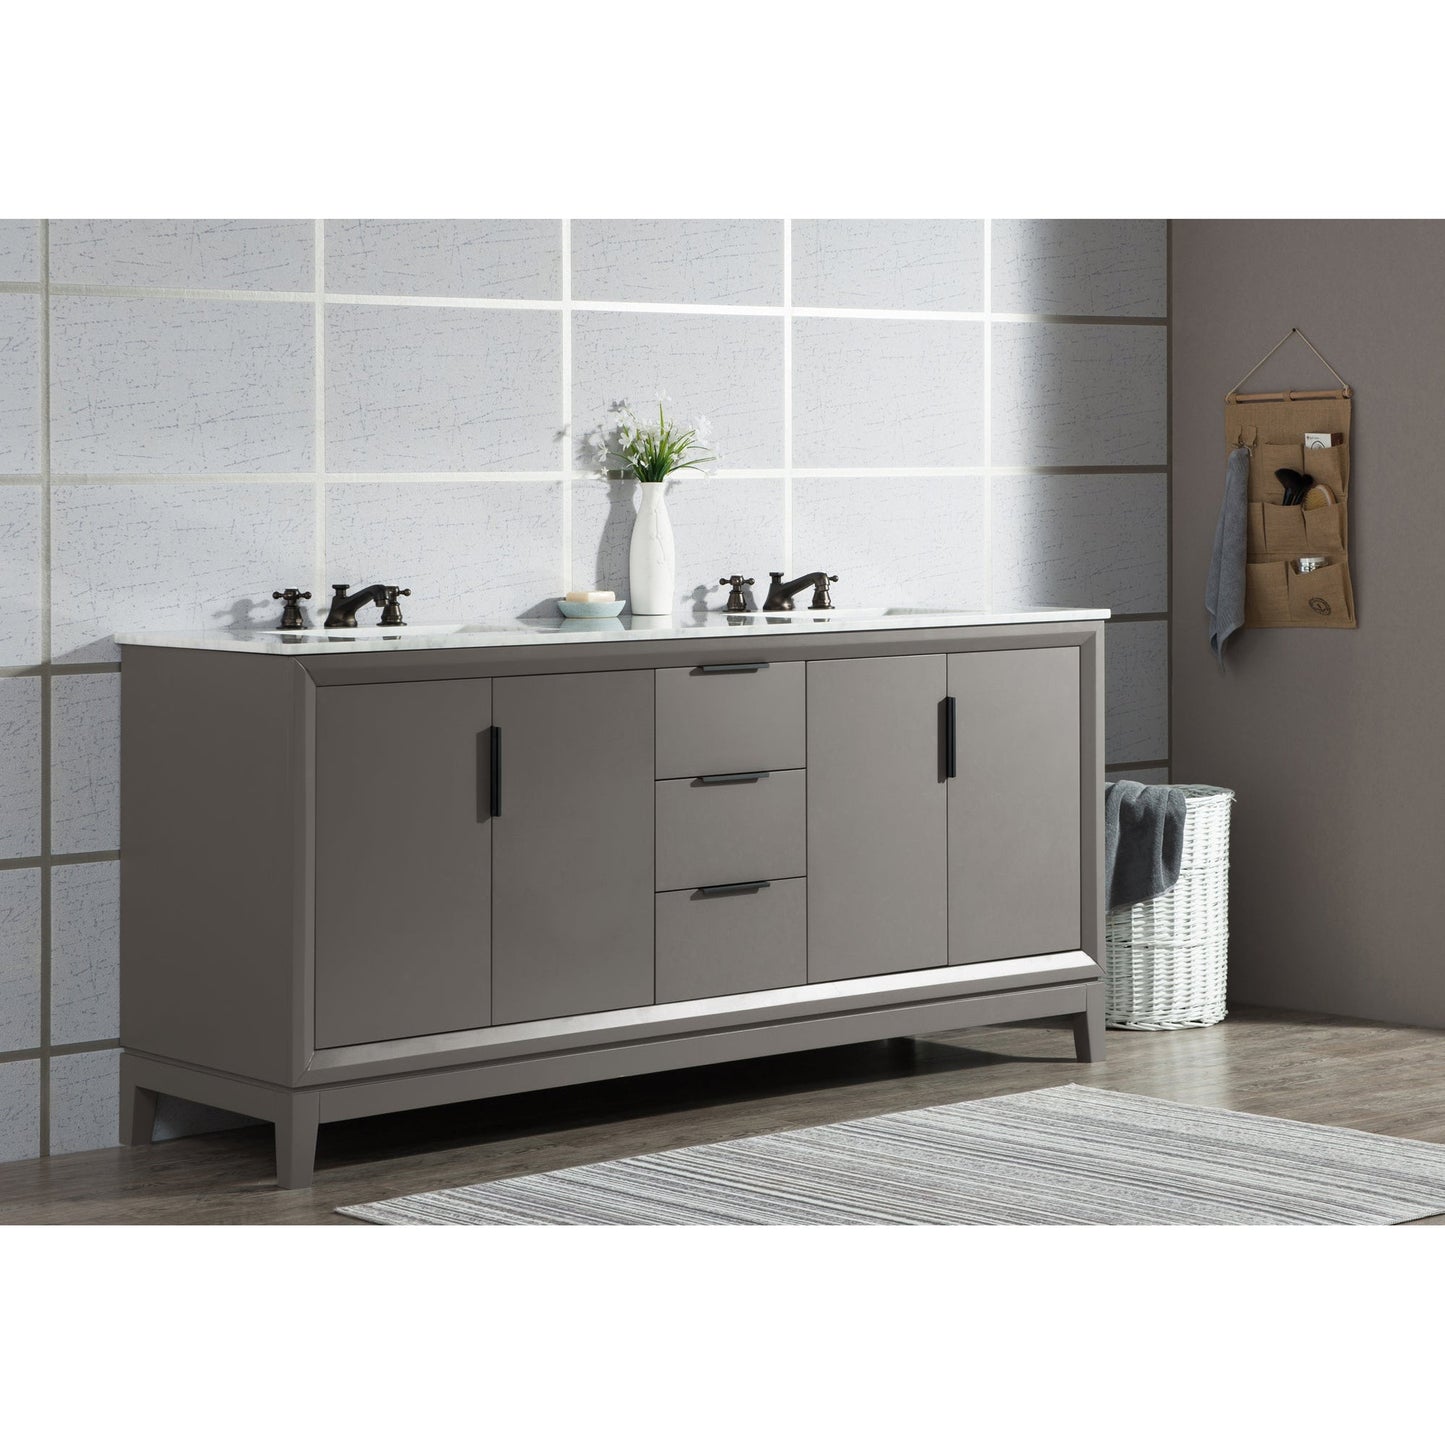 Water Creation Elizabeth 72" Double Sink Carrara White Marble Vanity In Cashmere Grey With F2-0009-03-BX Lavatory Faucet